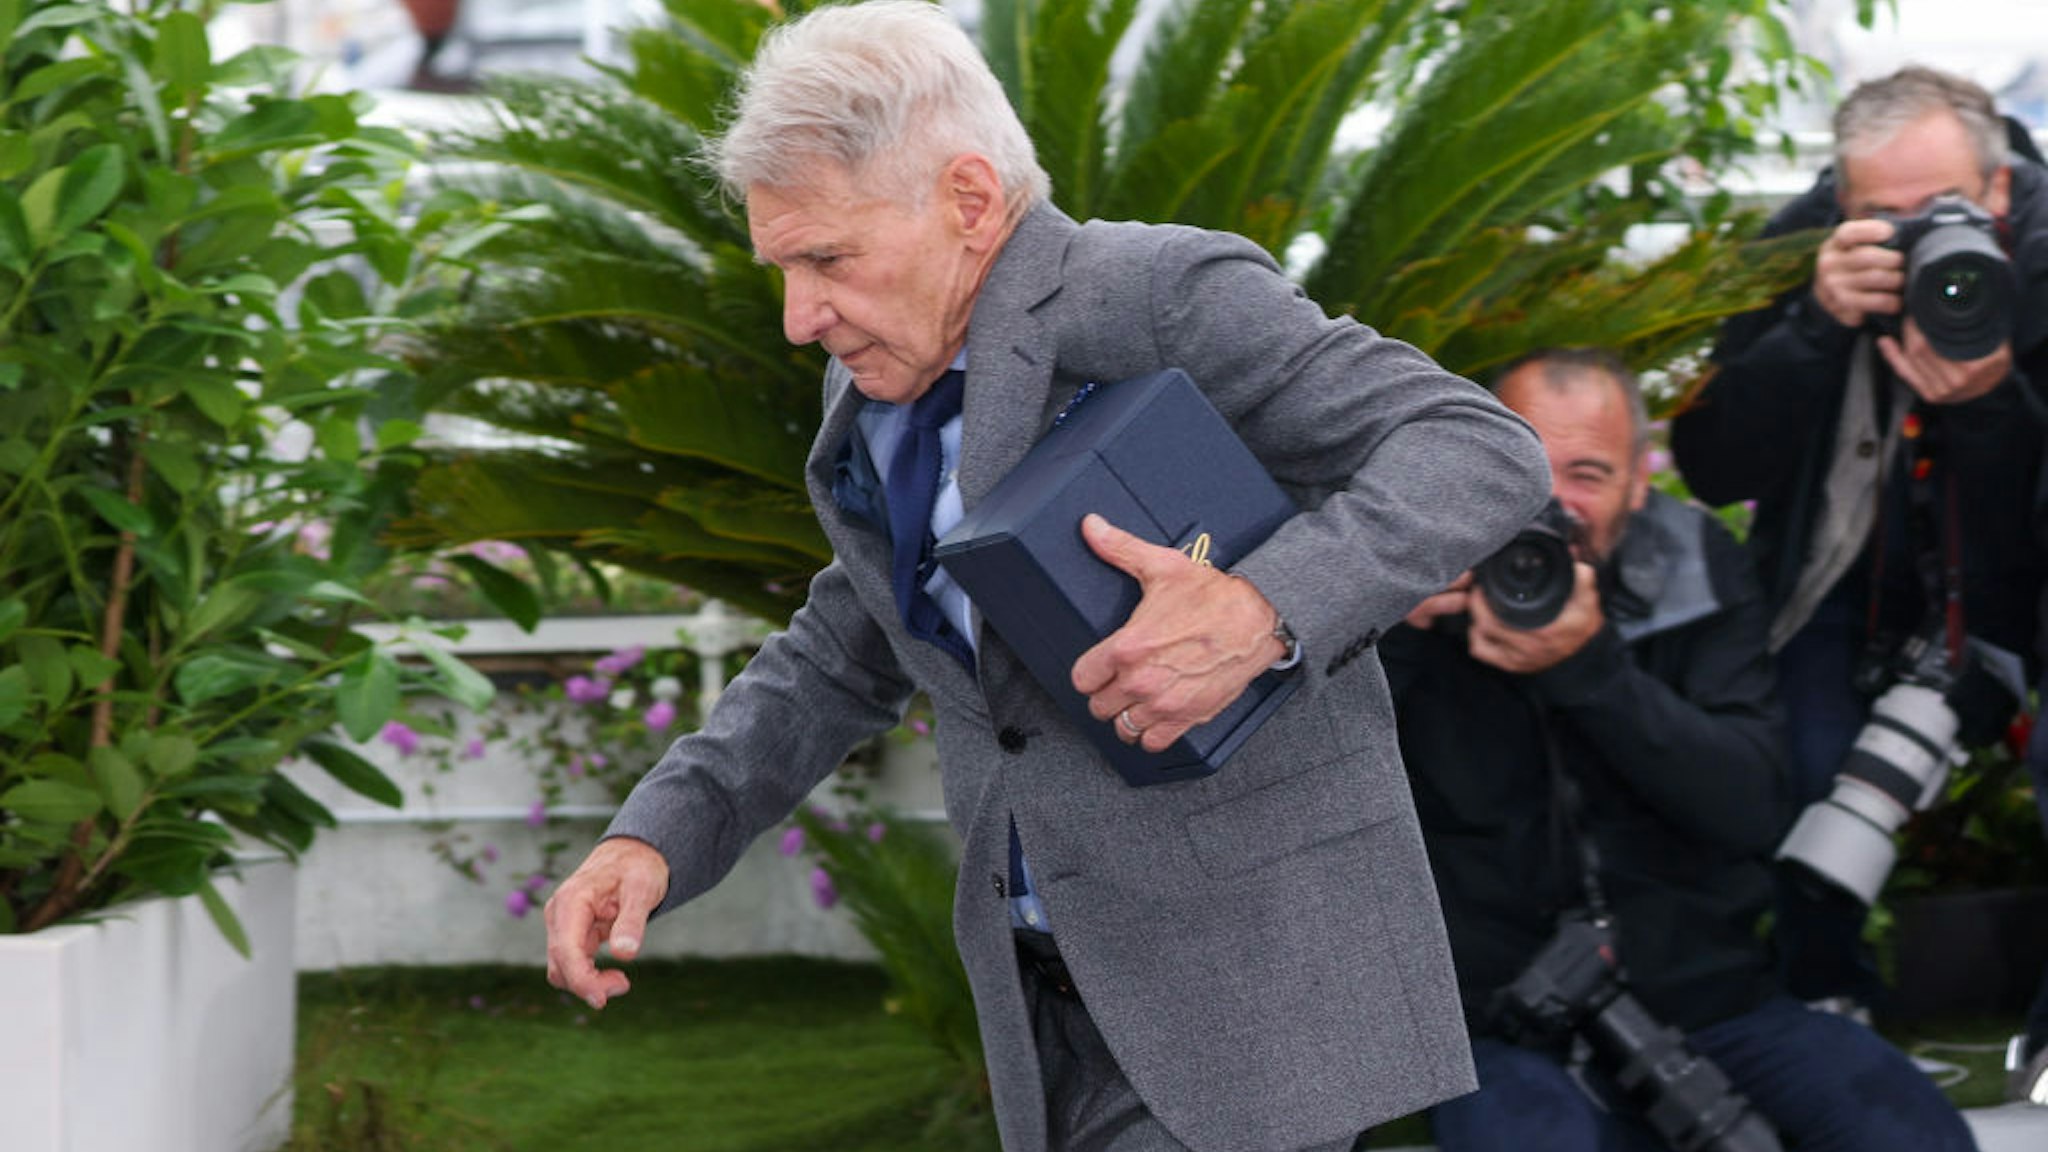 CANNES, FRANCE - MAY 19: Harrison Ford attends the "Indiana Jones And The Dial Of Destiny" photocall at the 76th annual Cannes film festival at Palais des Festivals on May 19, 2023 in Cannes, France. (Photo by